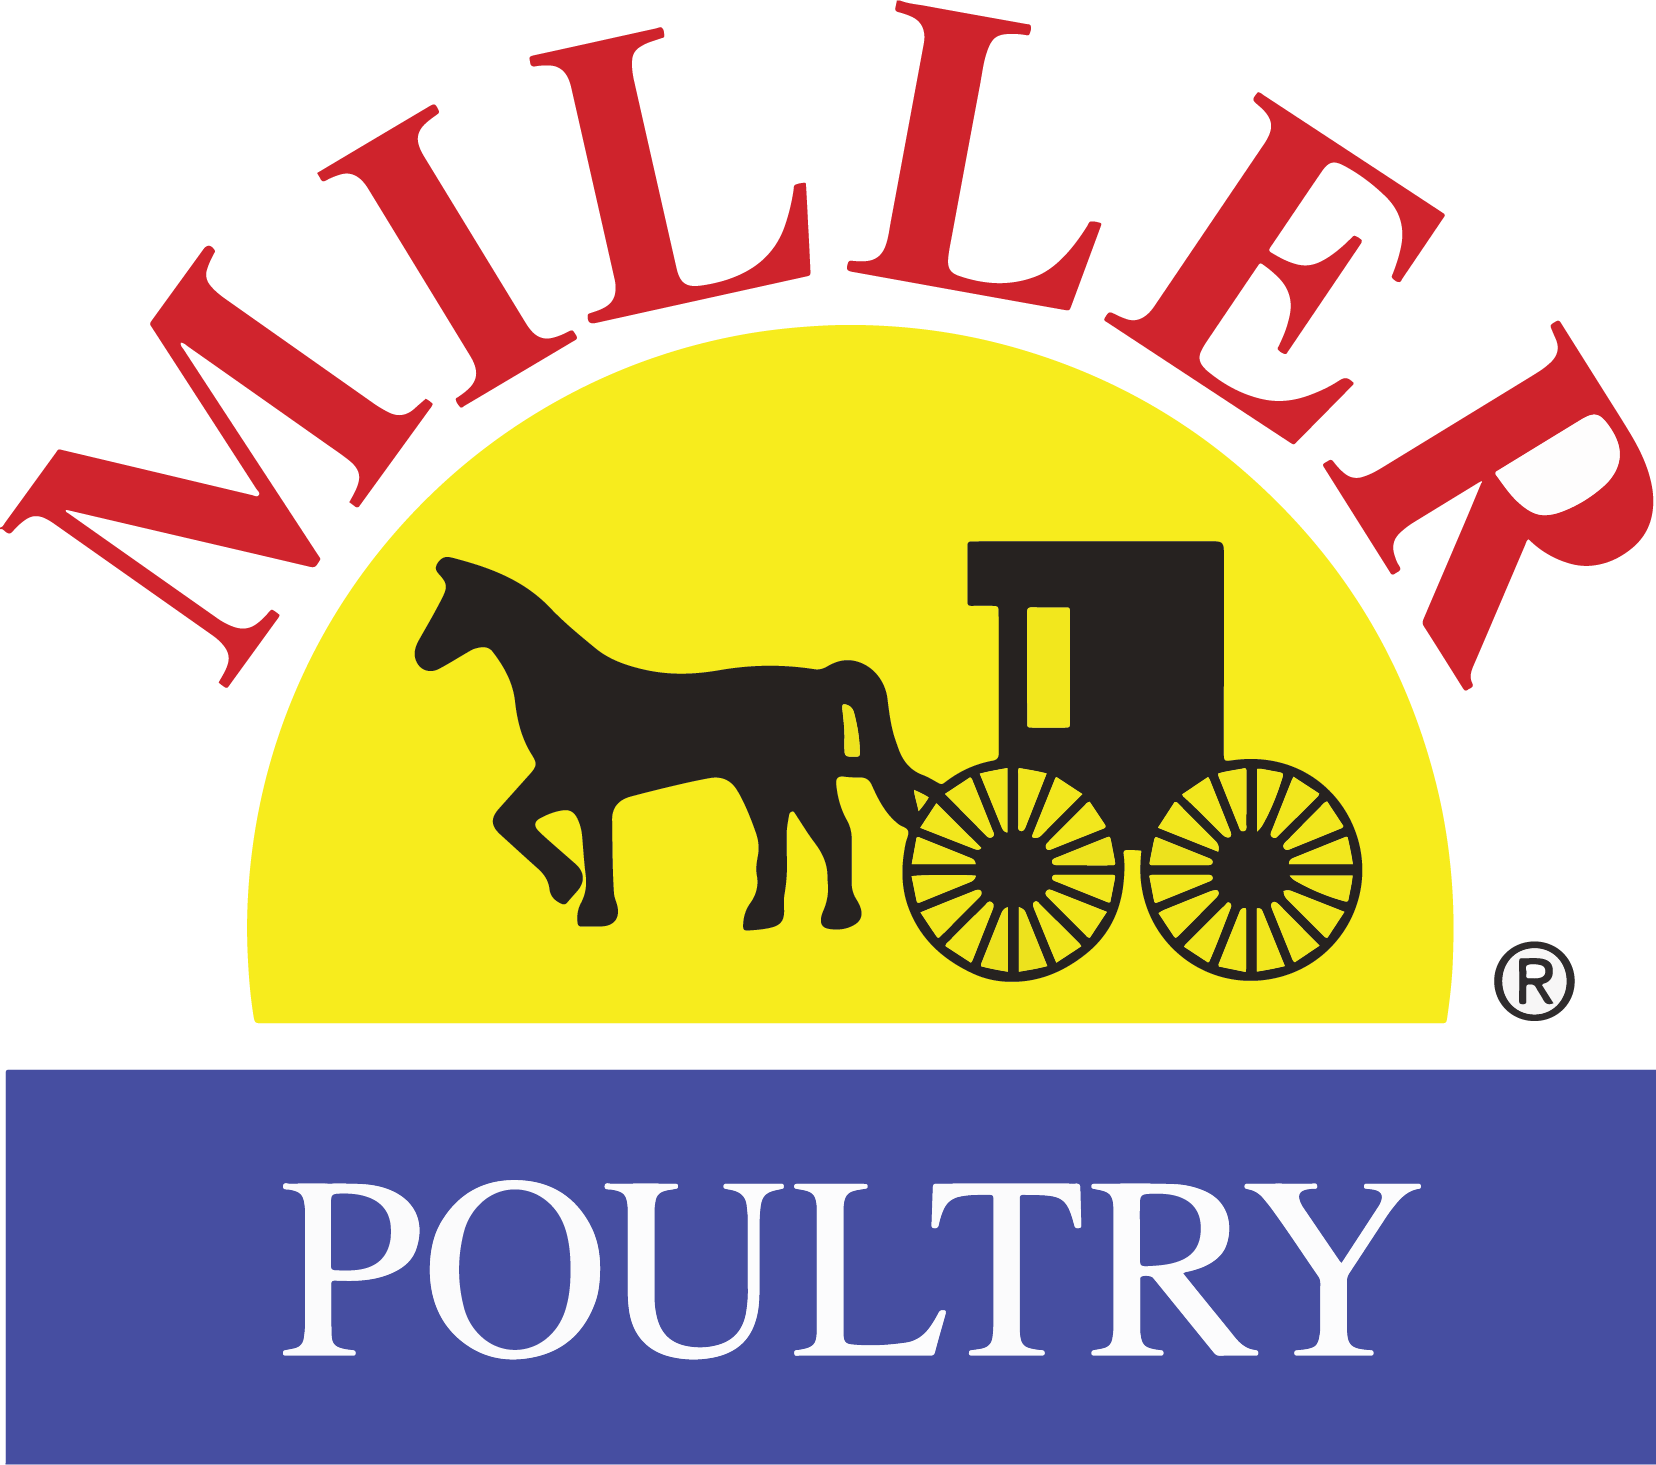 2020 Outstanding Service Award Recipient at Miller Poultry